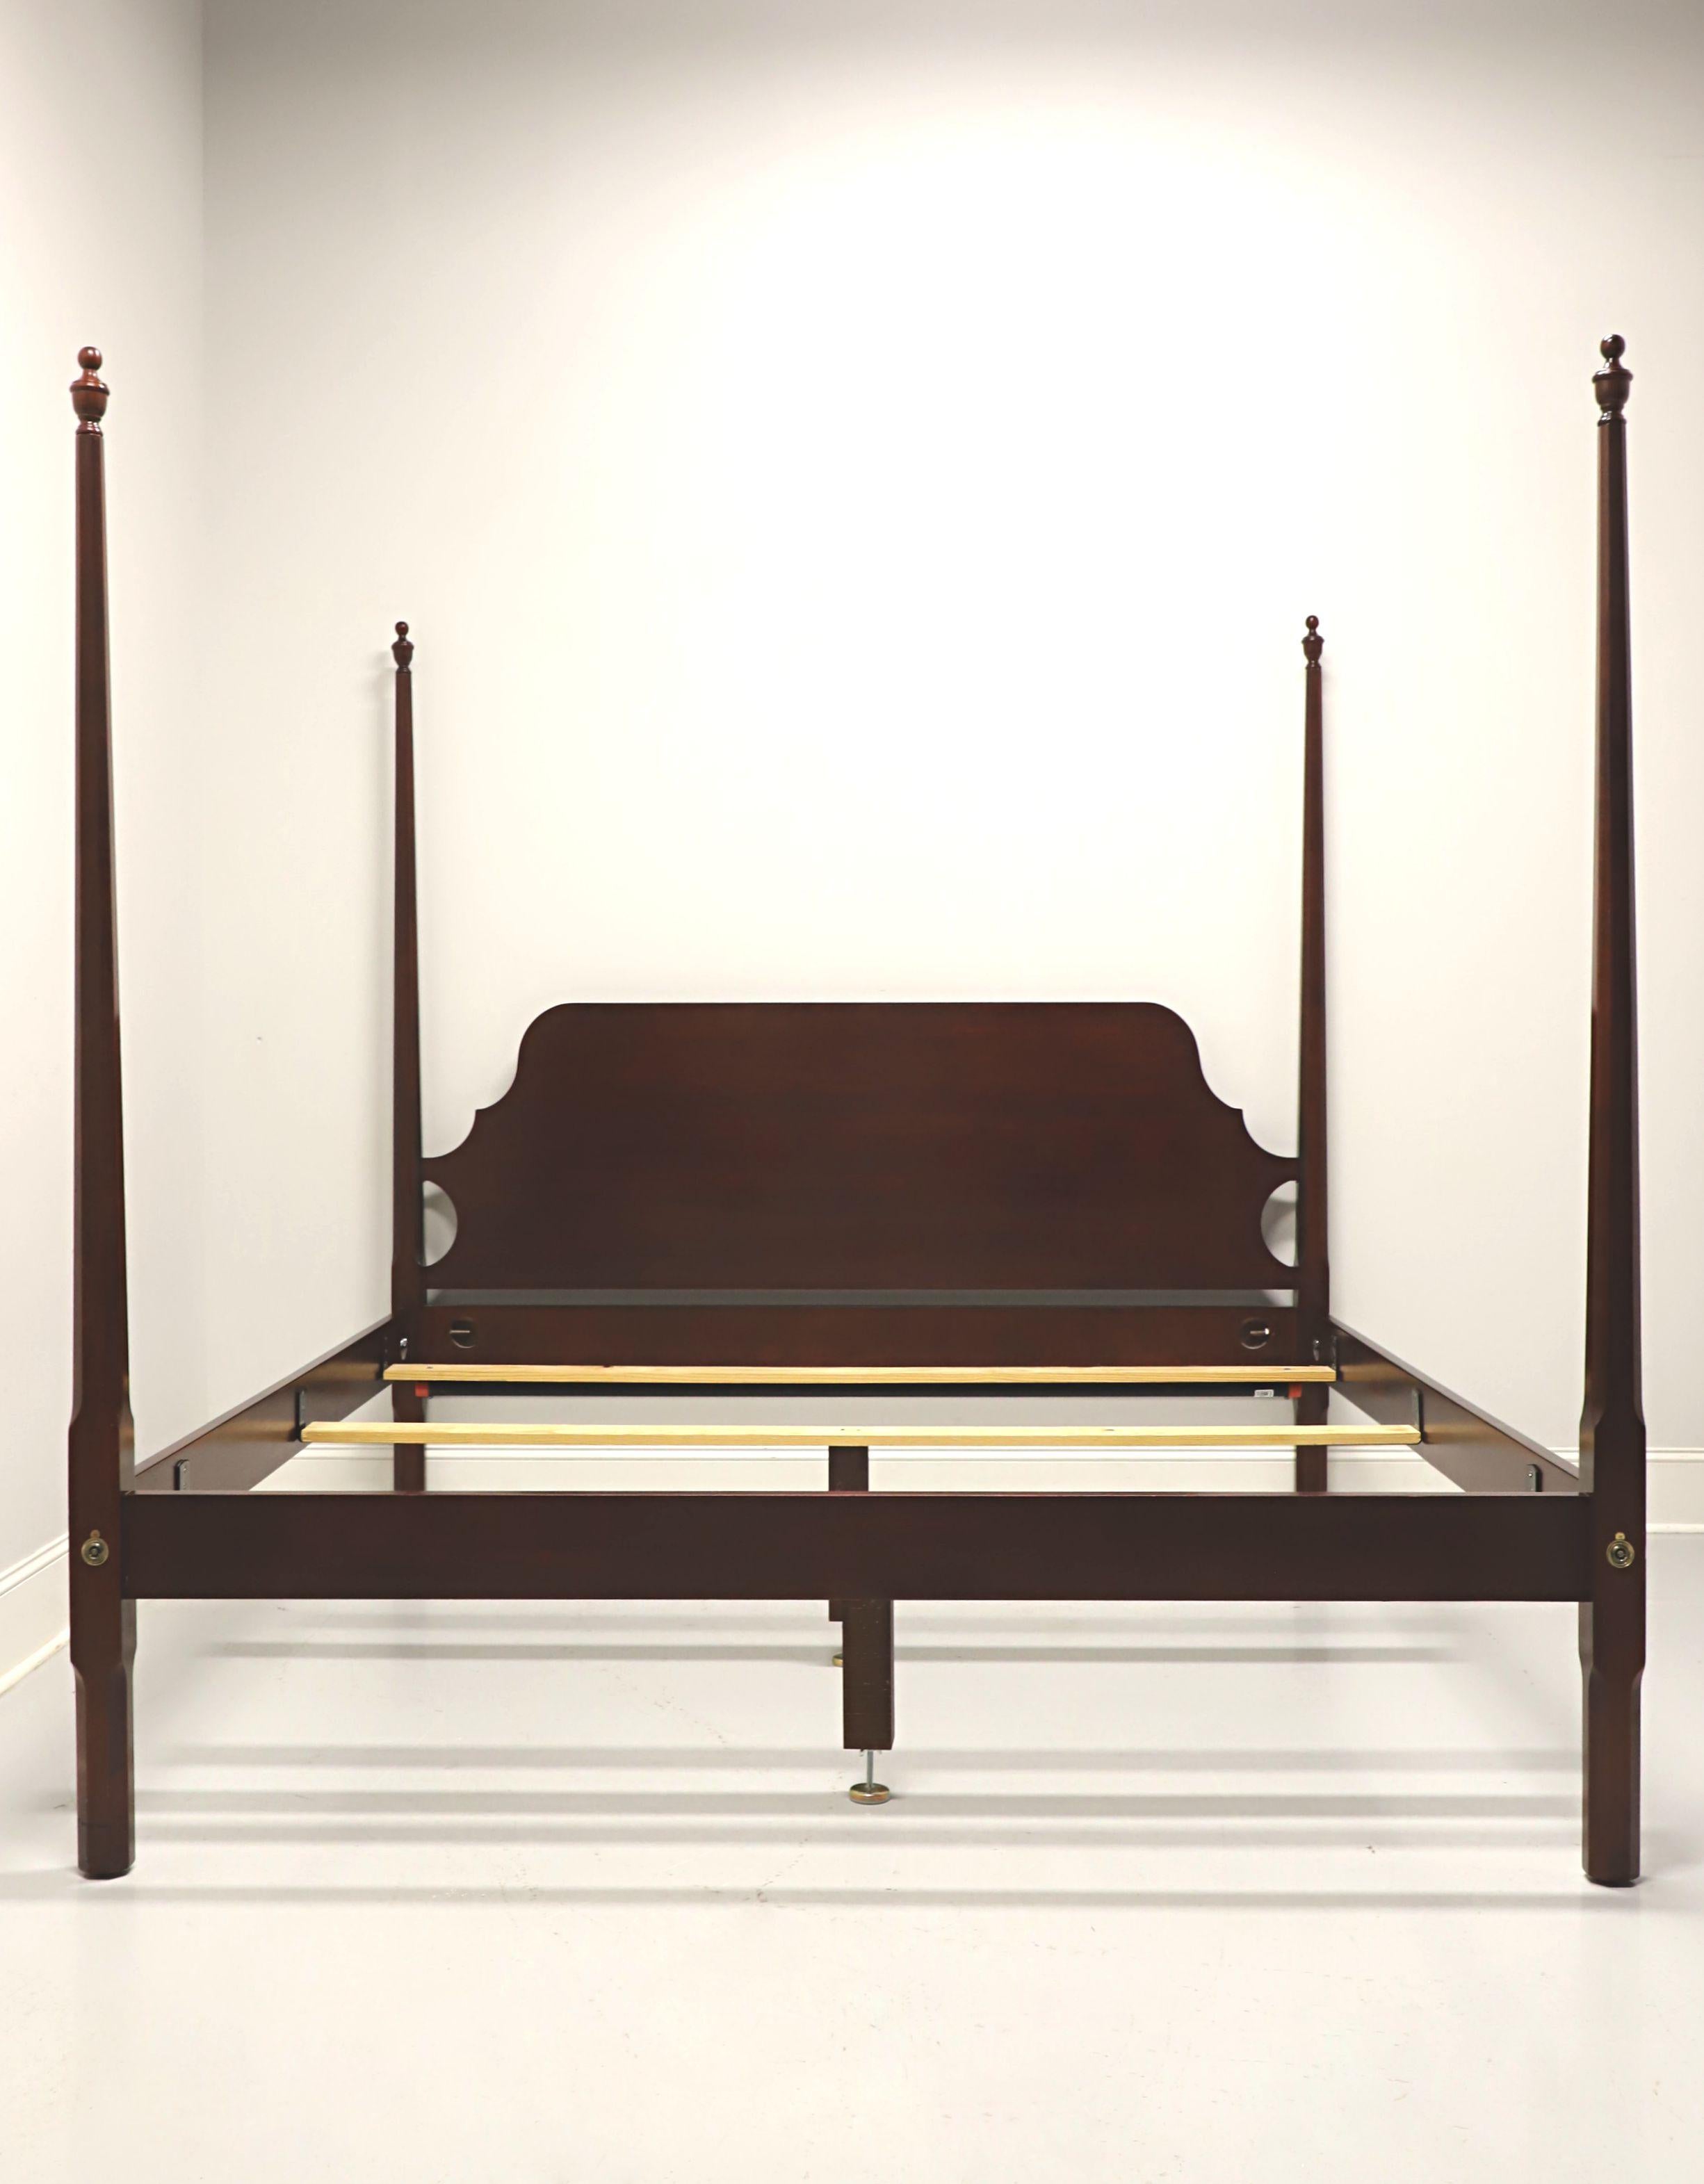 A Traditional style king size pencil post bed by Craftique. Solid mahogany with four pencil shaped posts with finials, brass covers to headboard & footboard, mounted to posts side rails, and metal side rail bracers with three wood slats, two with